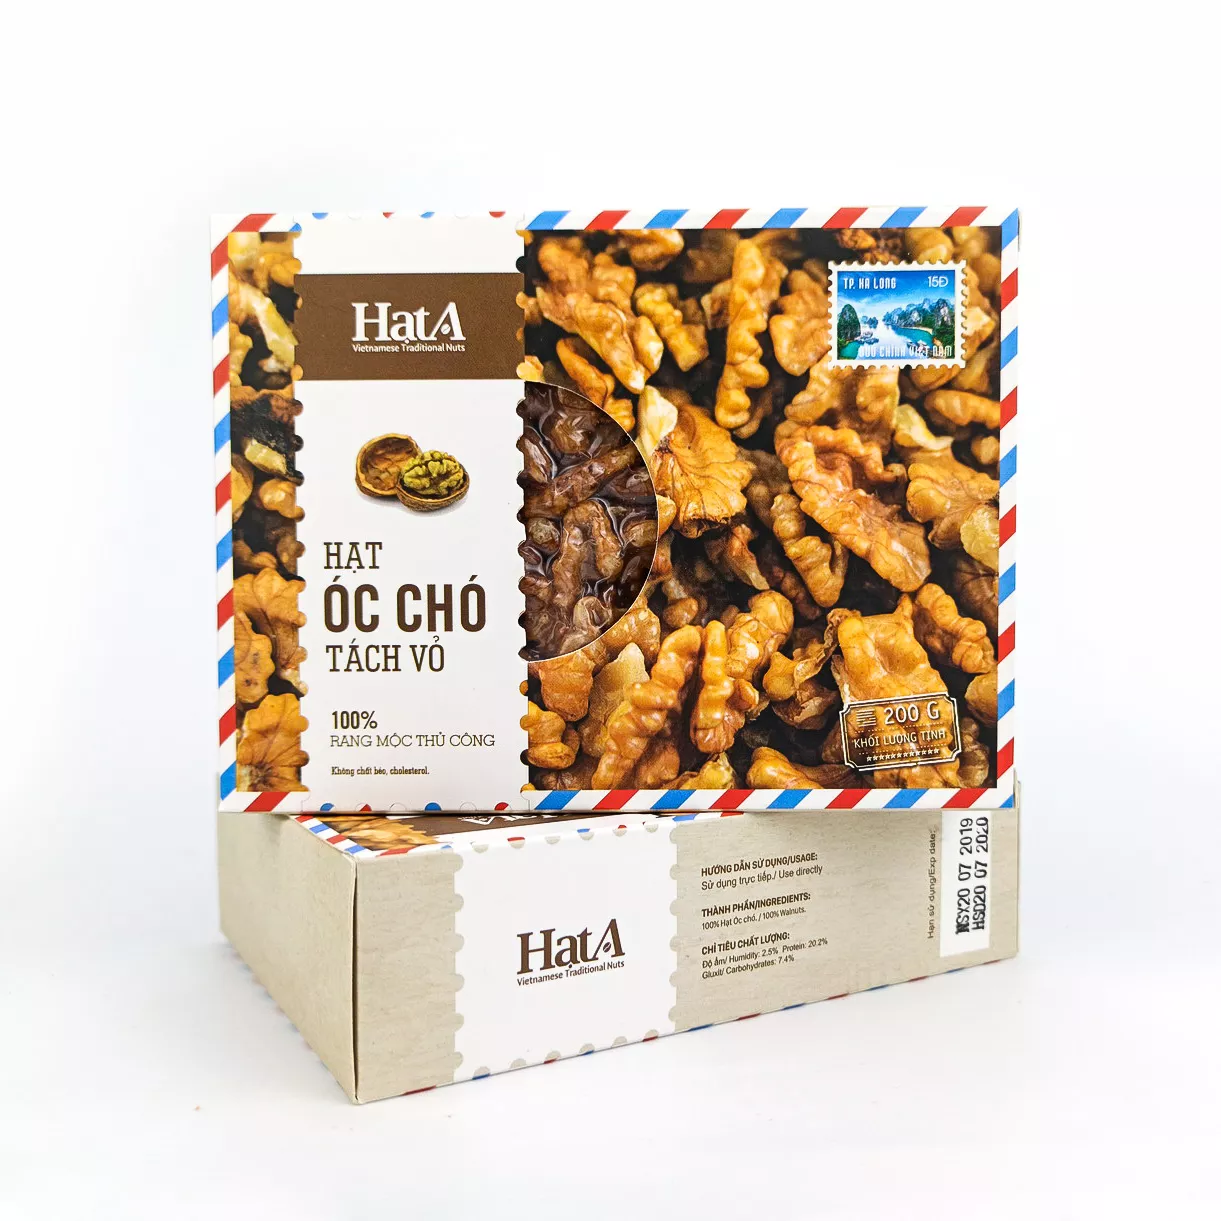 The High Quality Nuts / Dried Walnuts 200g